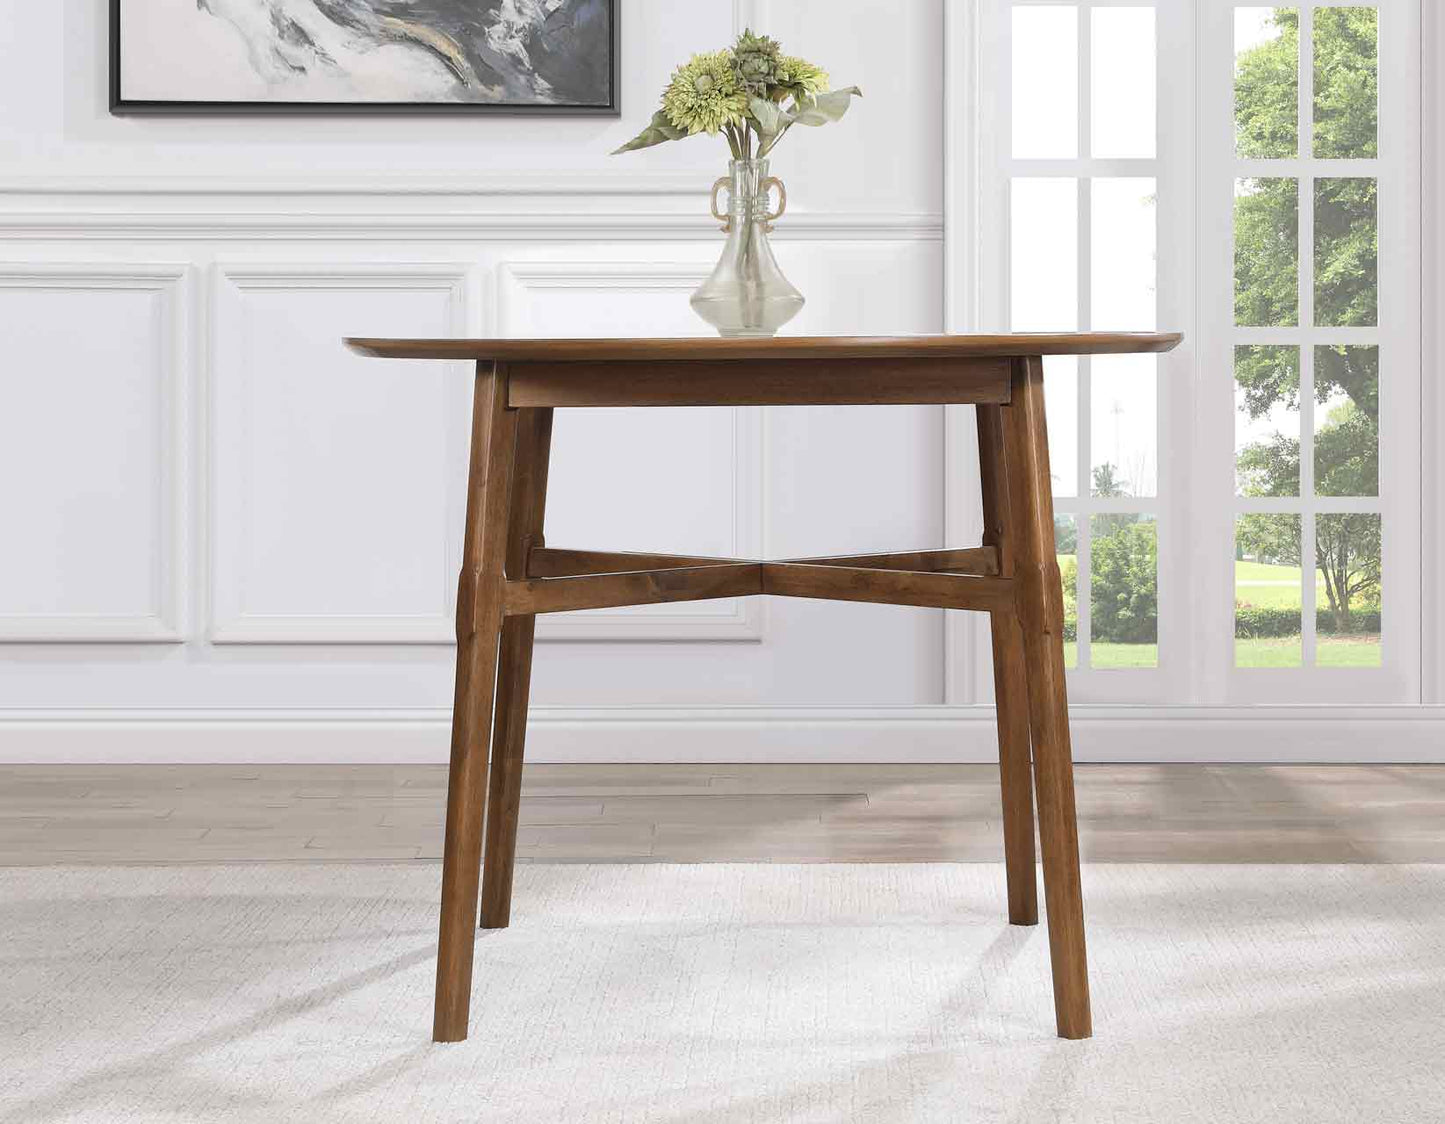 Oslo 5-Piece Counter Set
(Table & 4 Counter Chairs)